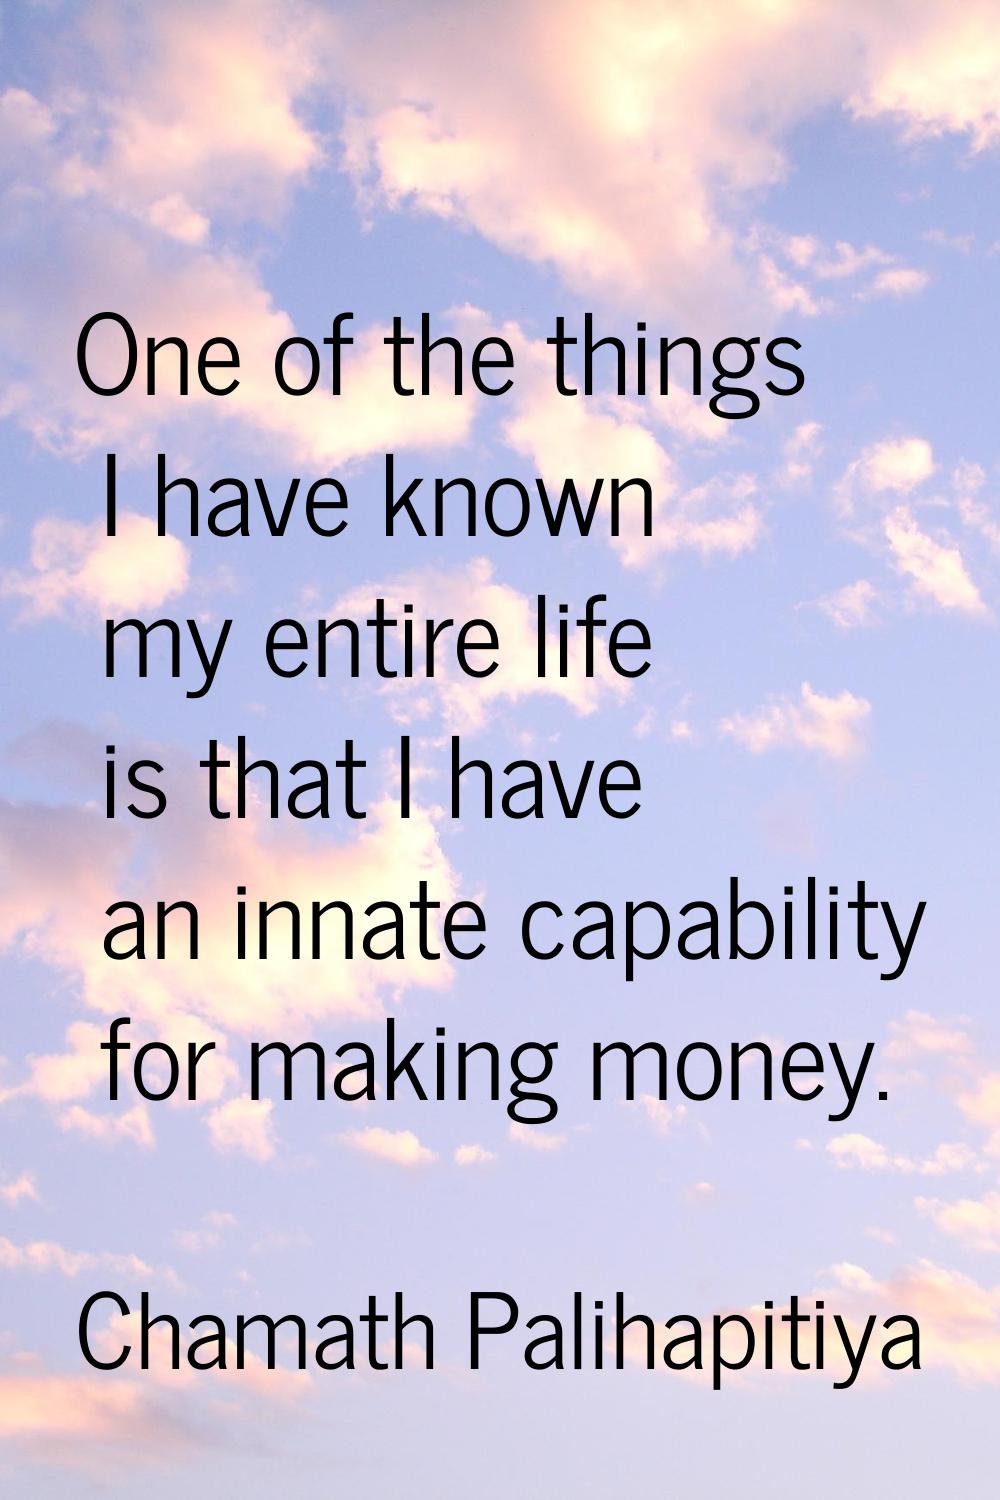 One of the things I have known my entire life is that I have an innate capability for making money.